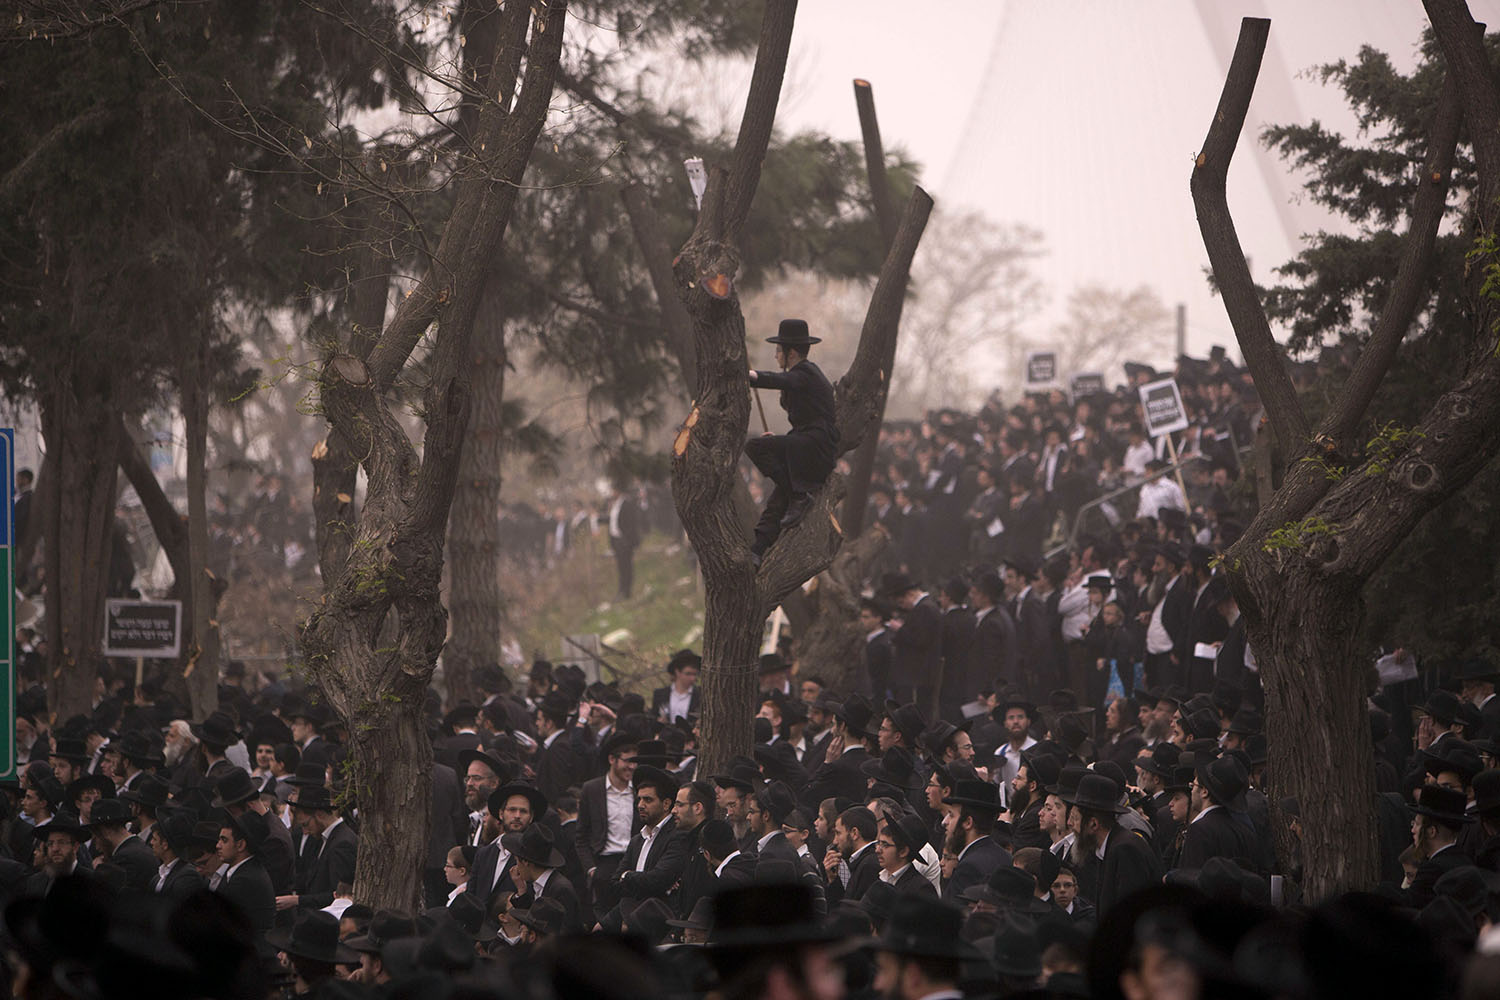 Mar. 2, 2014. Hundreds of thousands of ultra-Orthodox Jews rally in a massive show of force against plans to force them to serve in the Israeli military, blocking roads and paralyzing the city of Jerusalem.